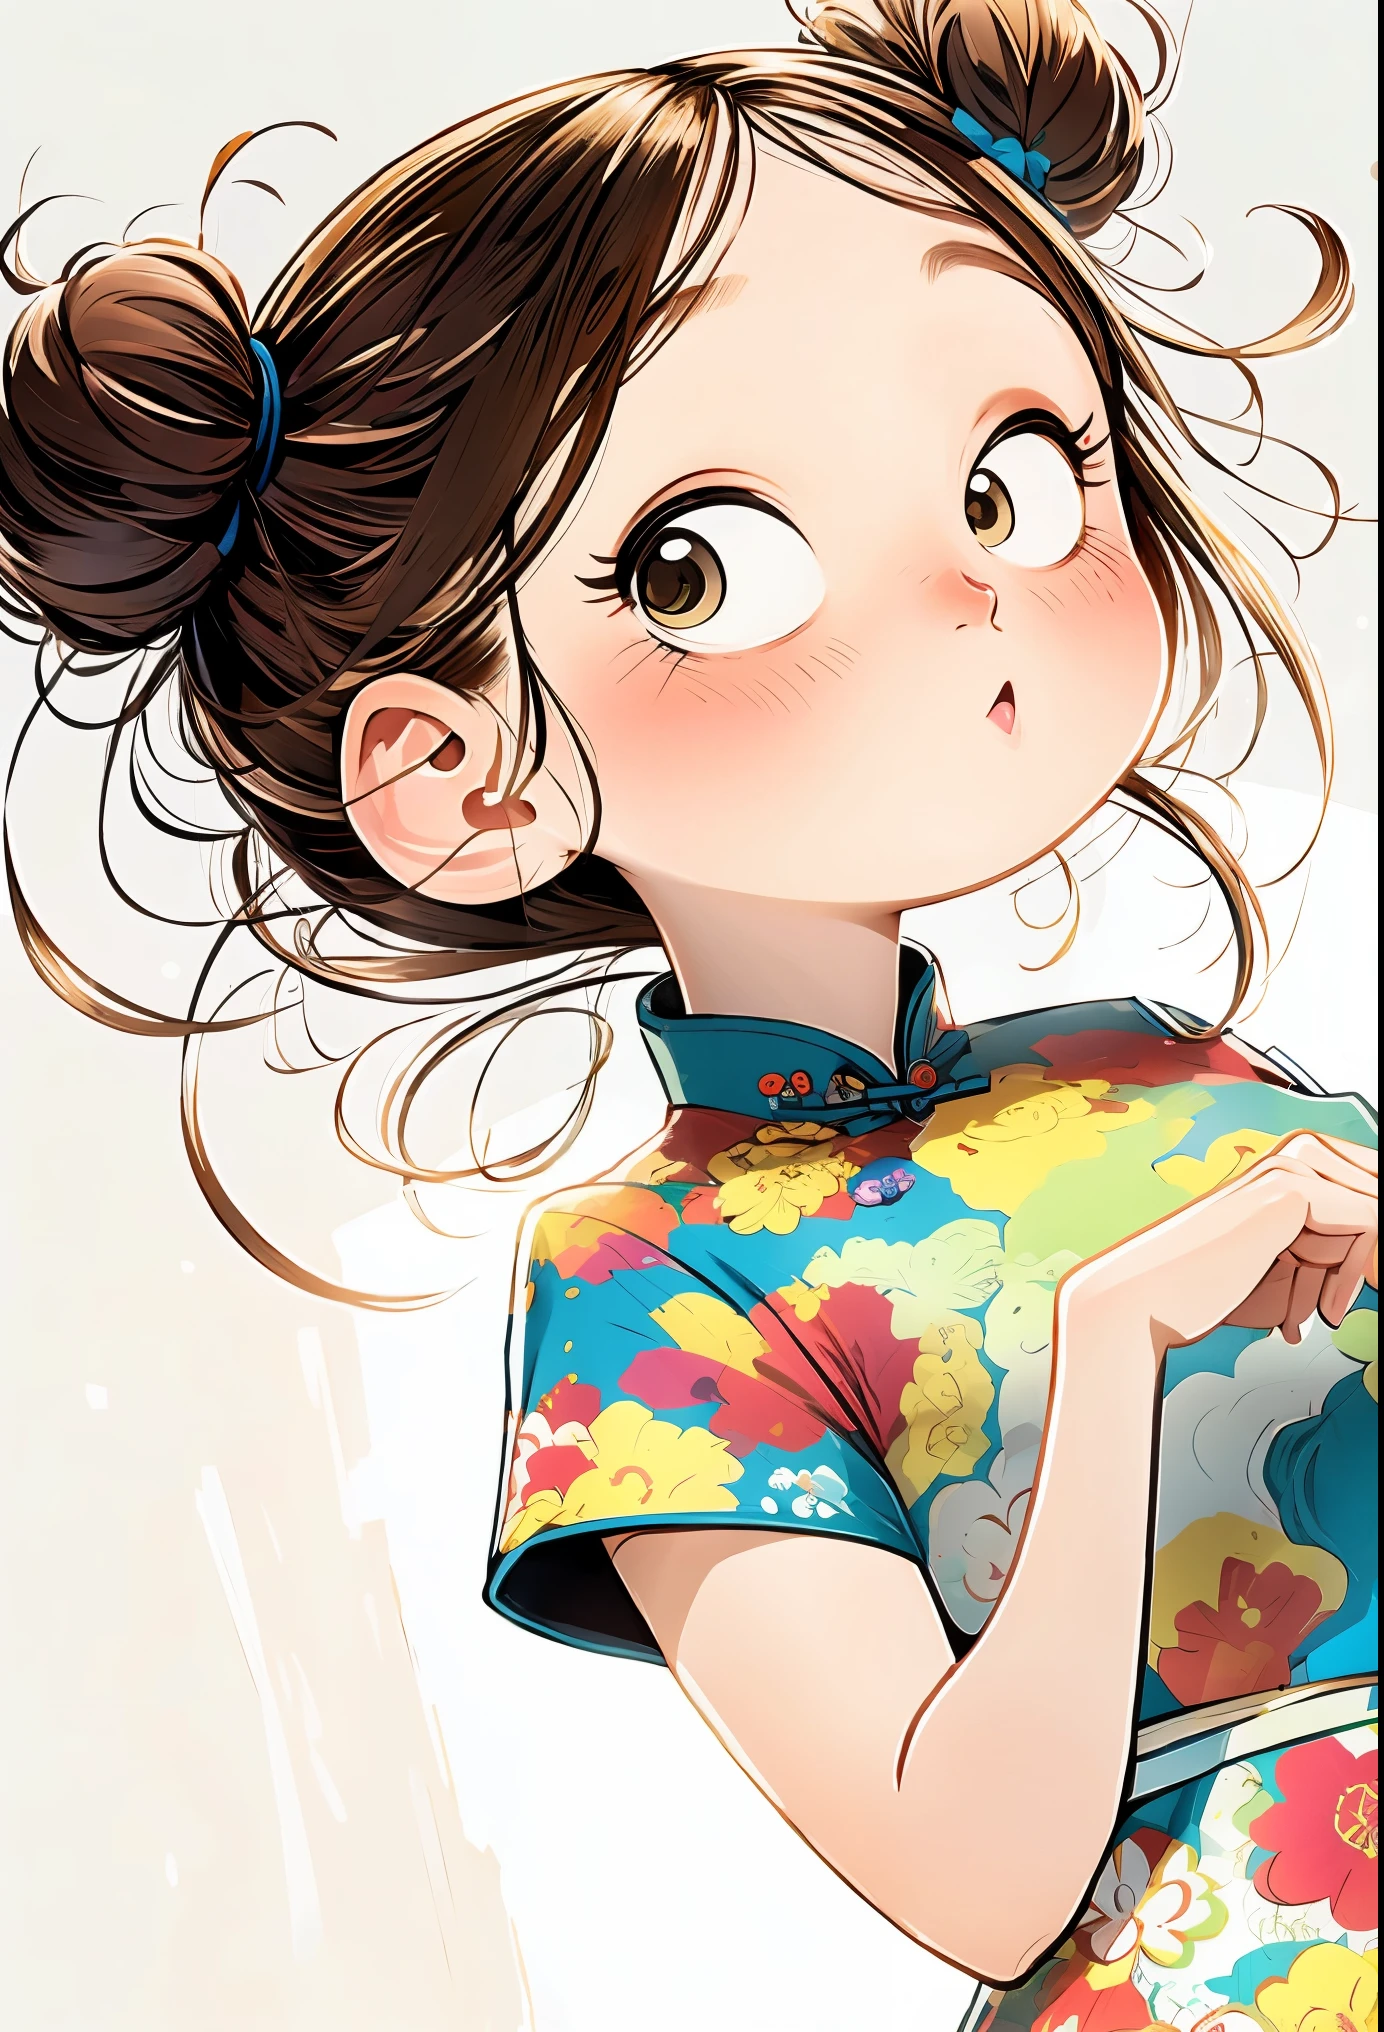 (masterpiece, best quality:1.2), watercolor painting，cartoonish character design。1 girl, alone，big eyes，Cute expression，Two little braids，cheongsam，portrait，interesting，interesting，clean lines，Leave blank，
